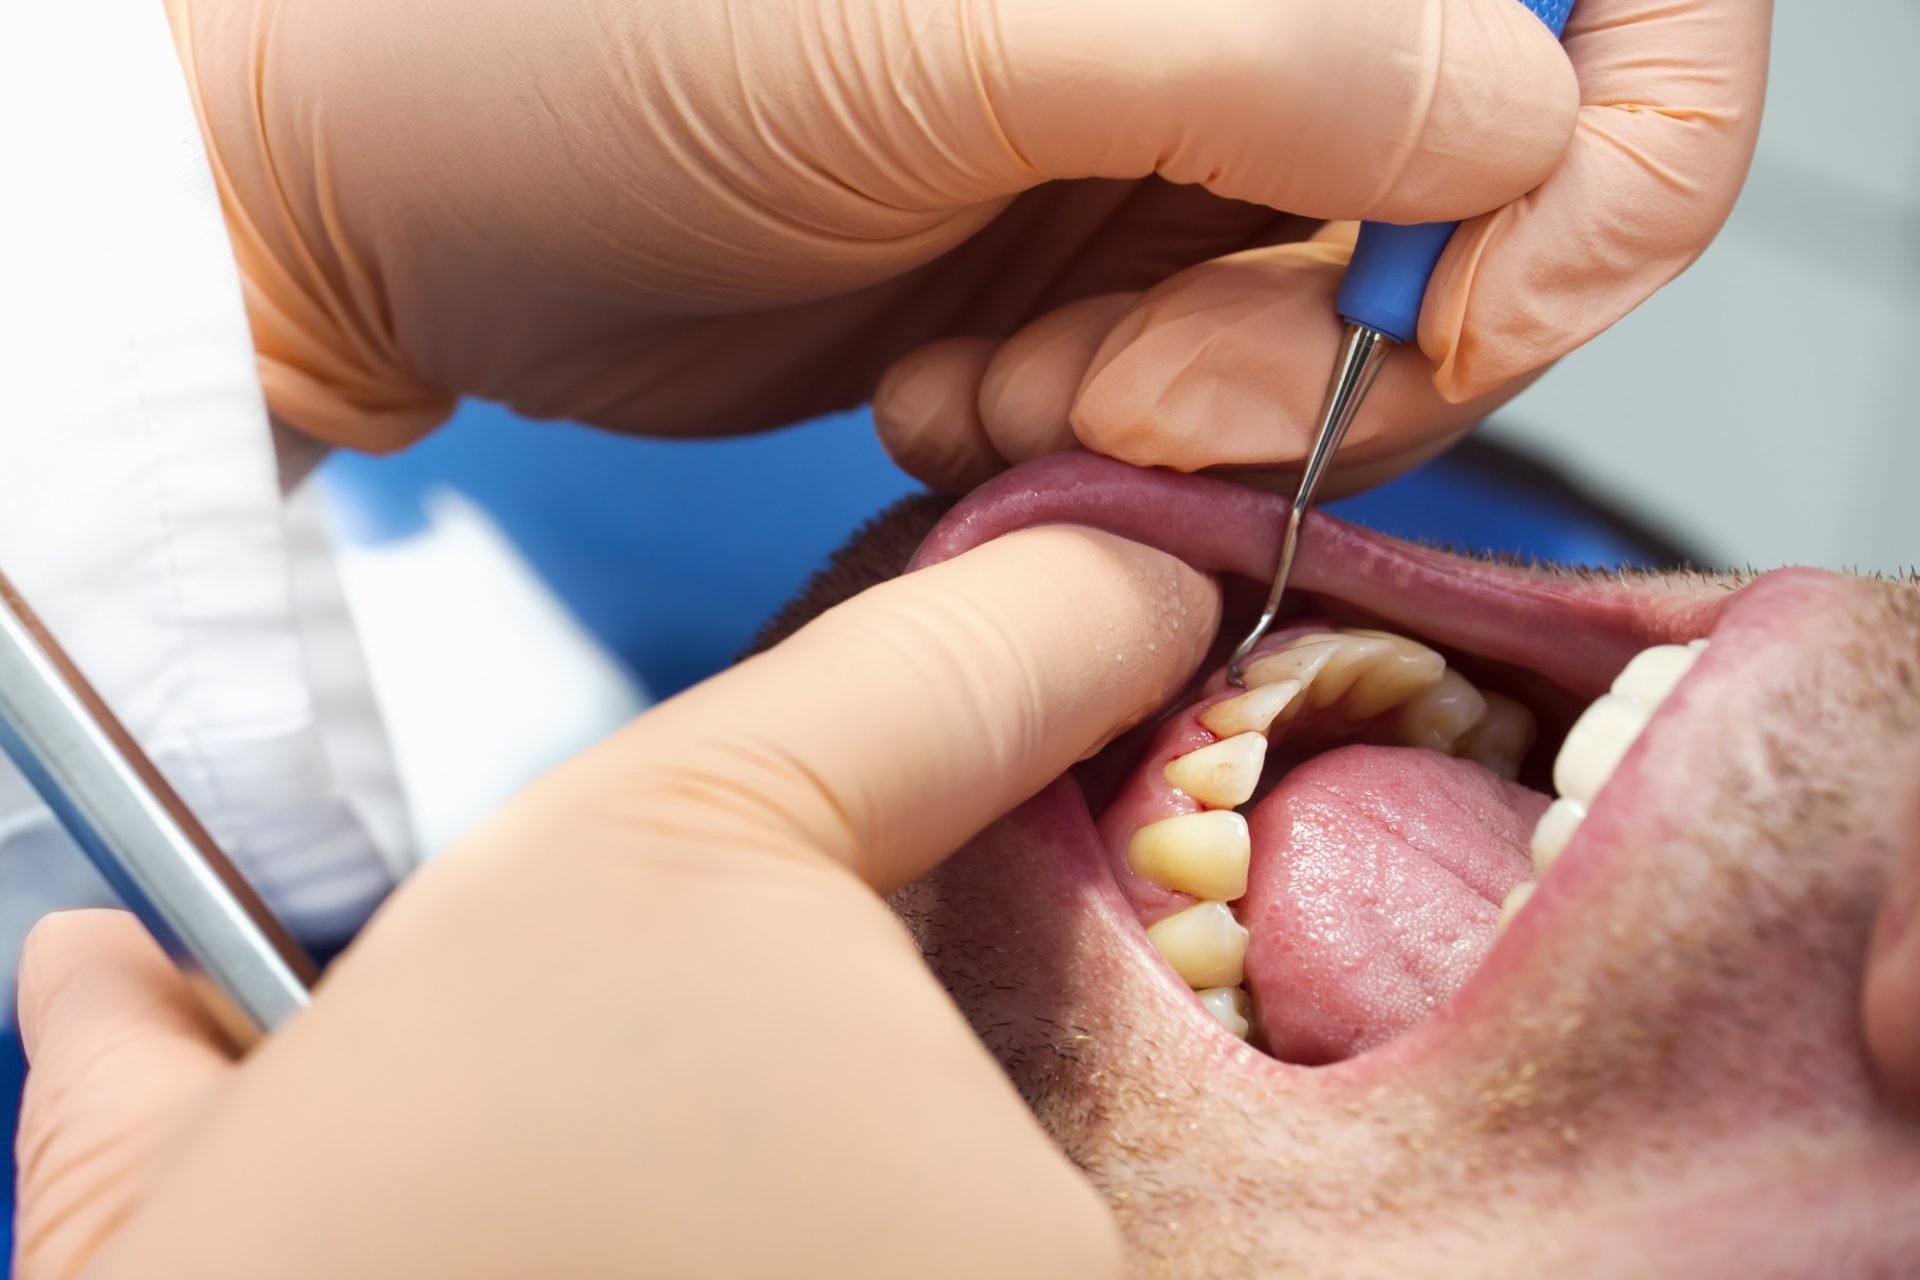 A man's mouth is treated for gum disease with LANAP alternative surgery.